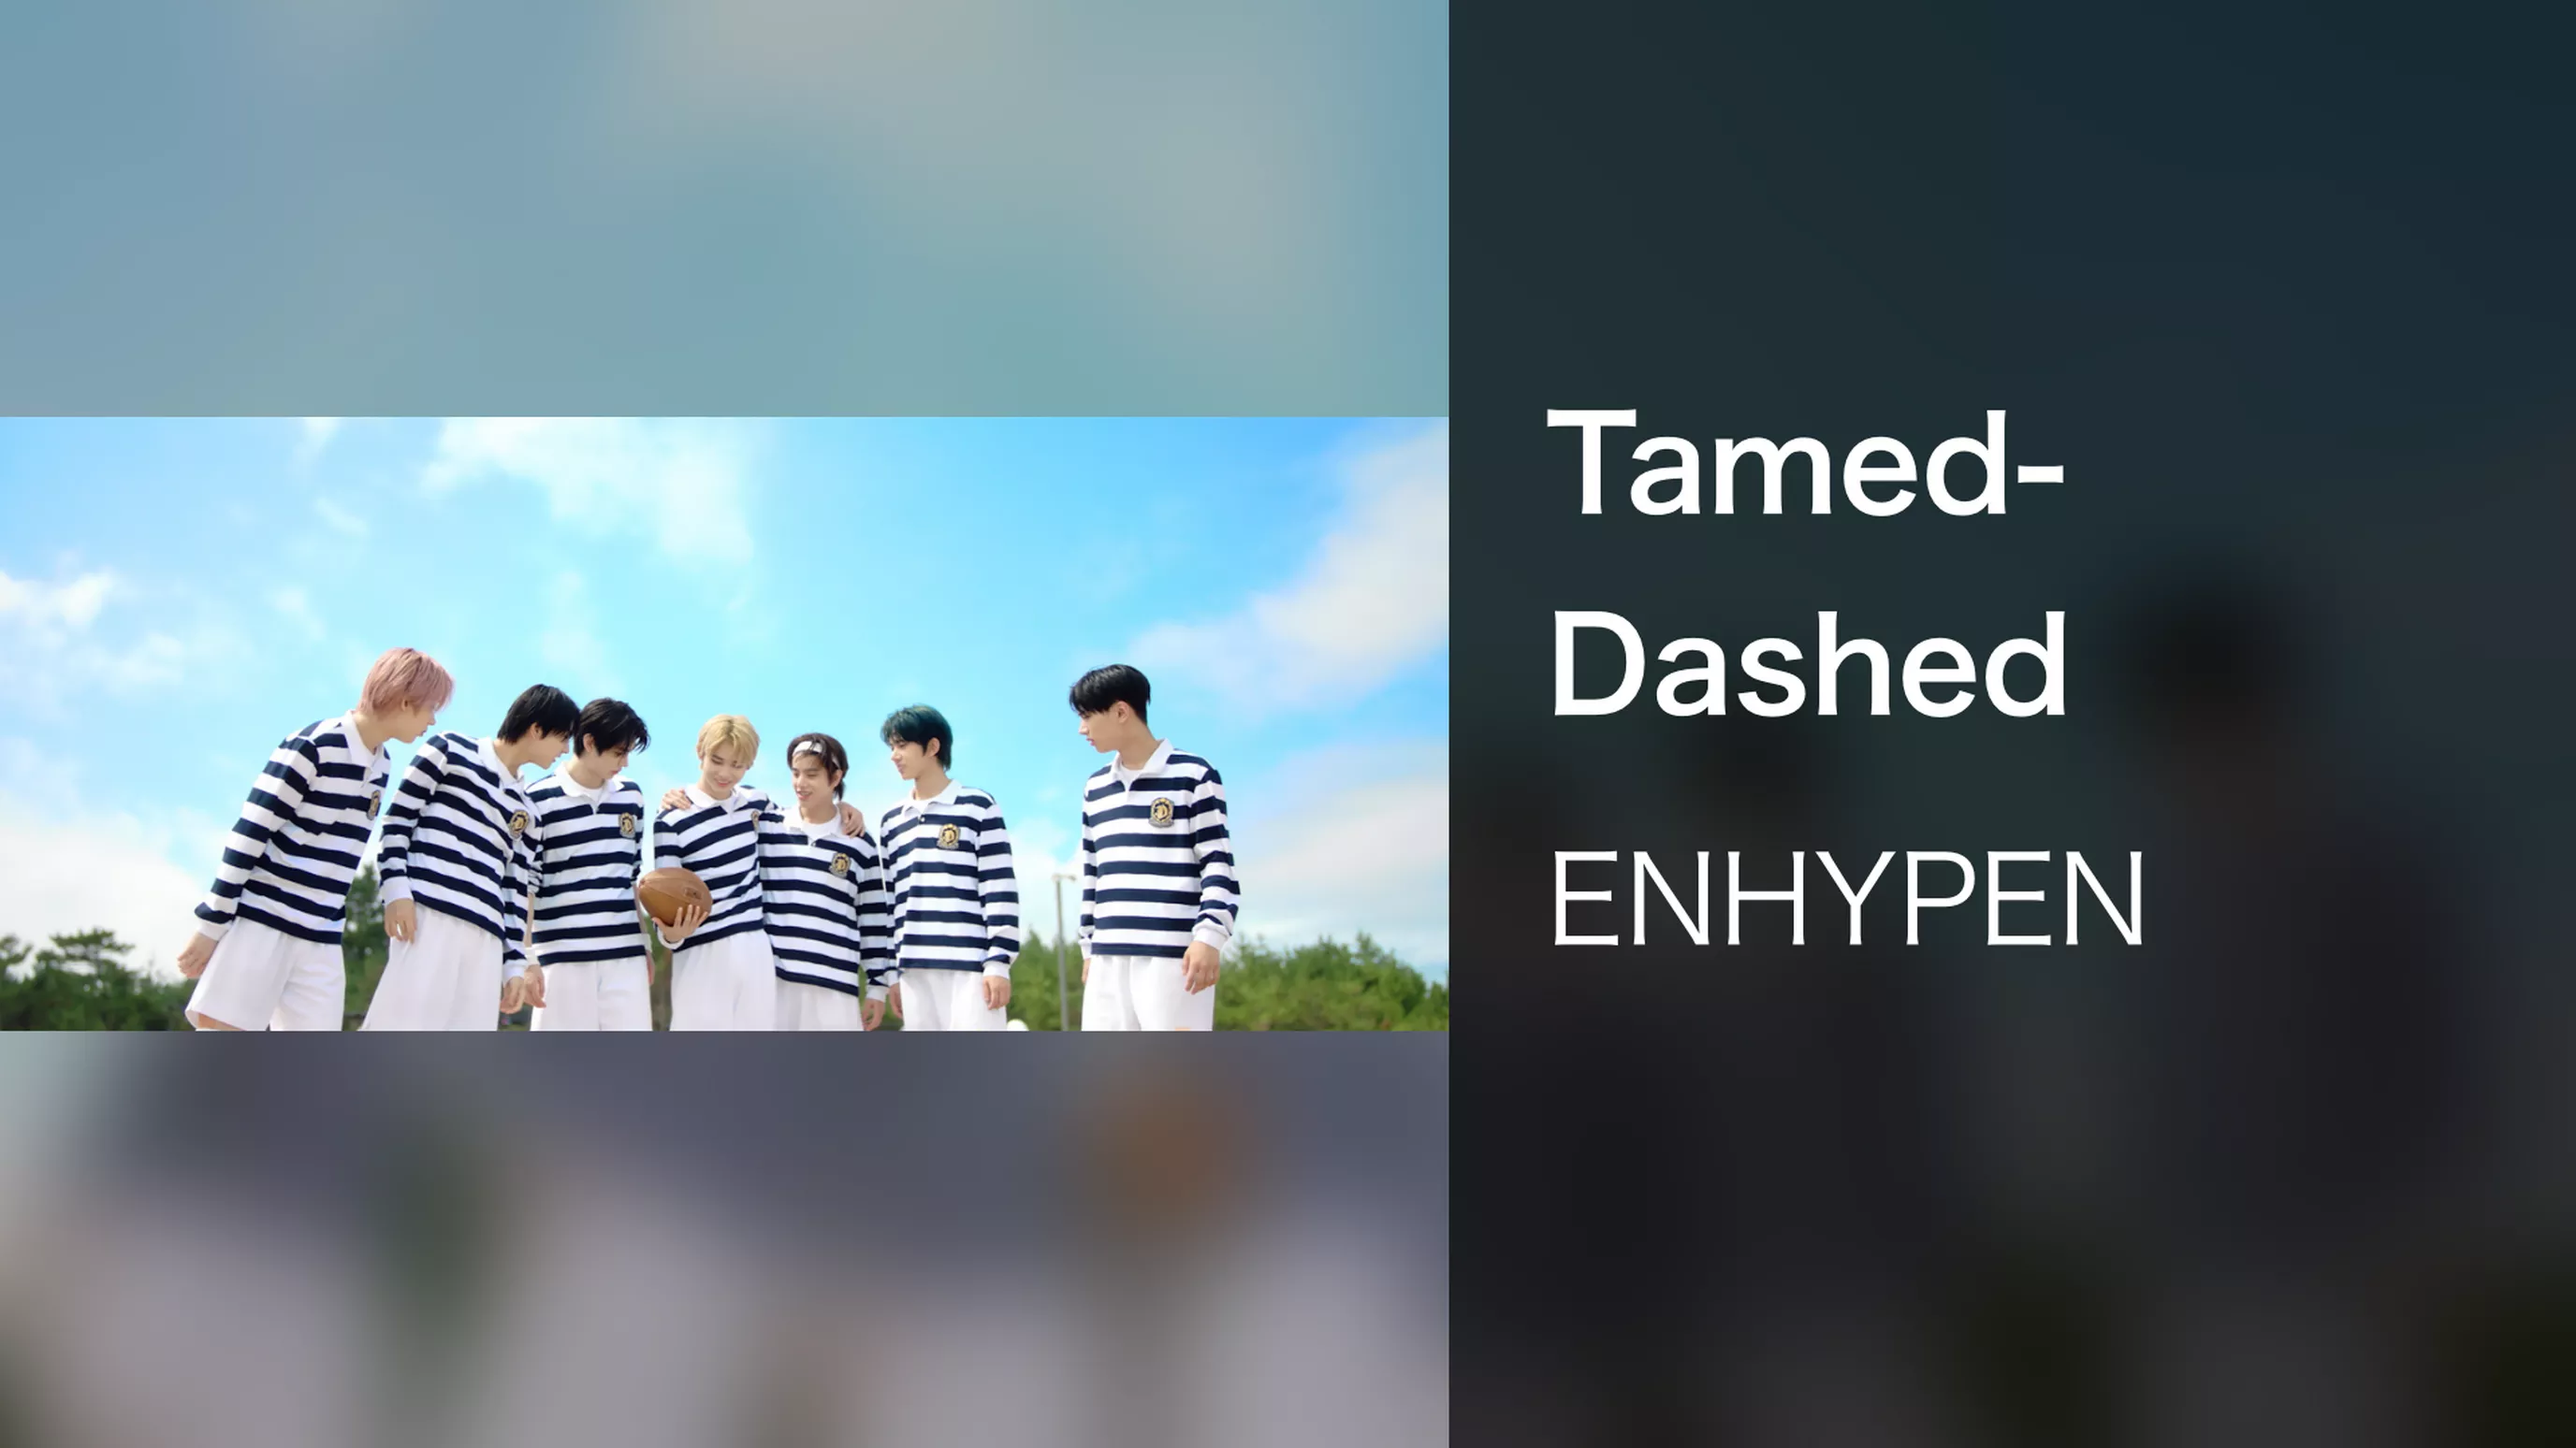 Tamed-Dashed